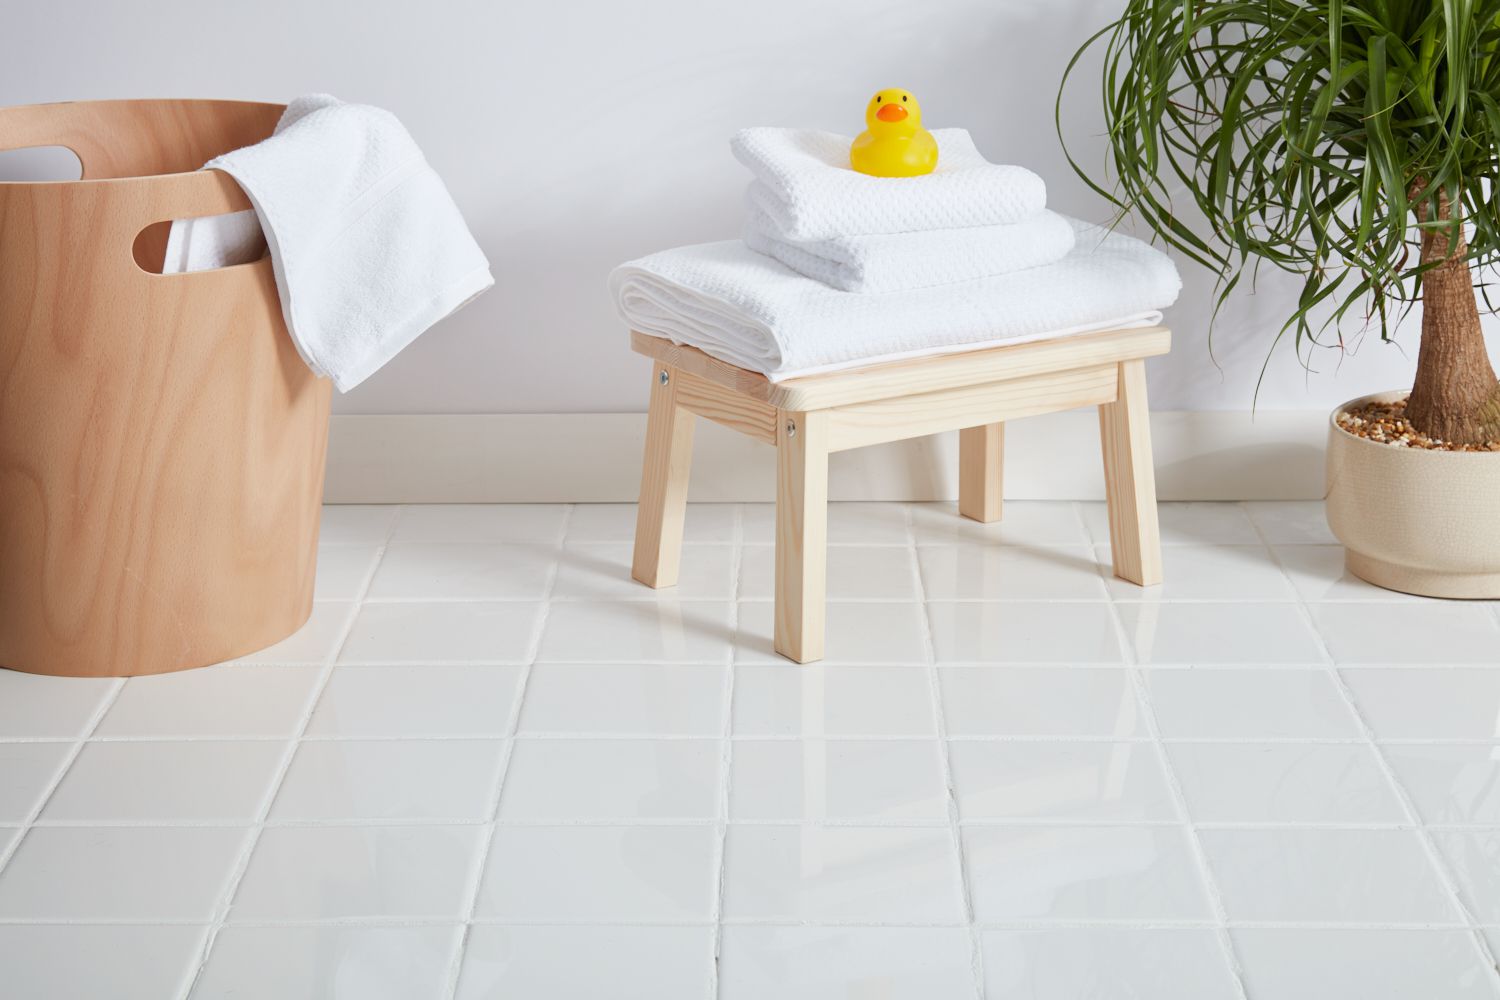 What Makes Ceramic a Great Fit for Floor Tiles?